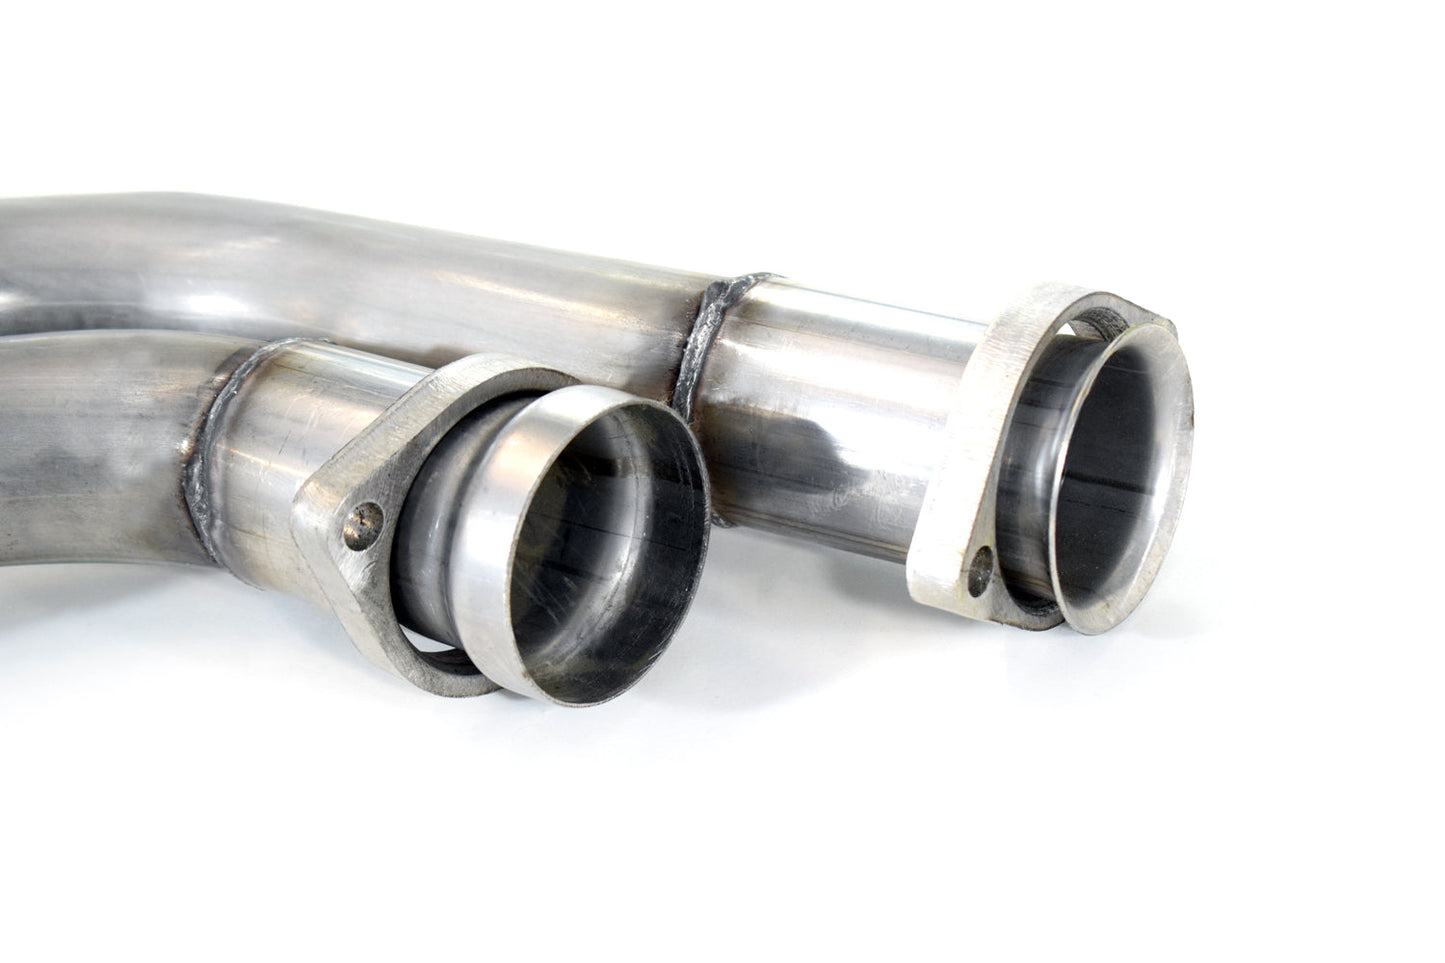 Mercedes 190 E 2.5 16V W201 - Stainless Steel Exhaust (1989-93) - QuickSilver Exhausts